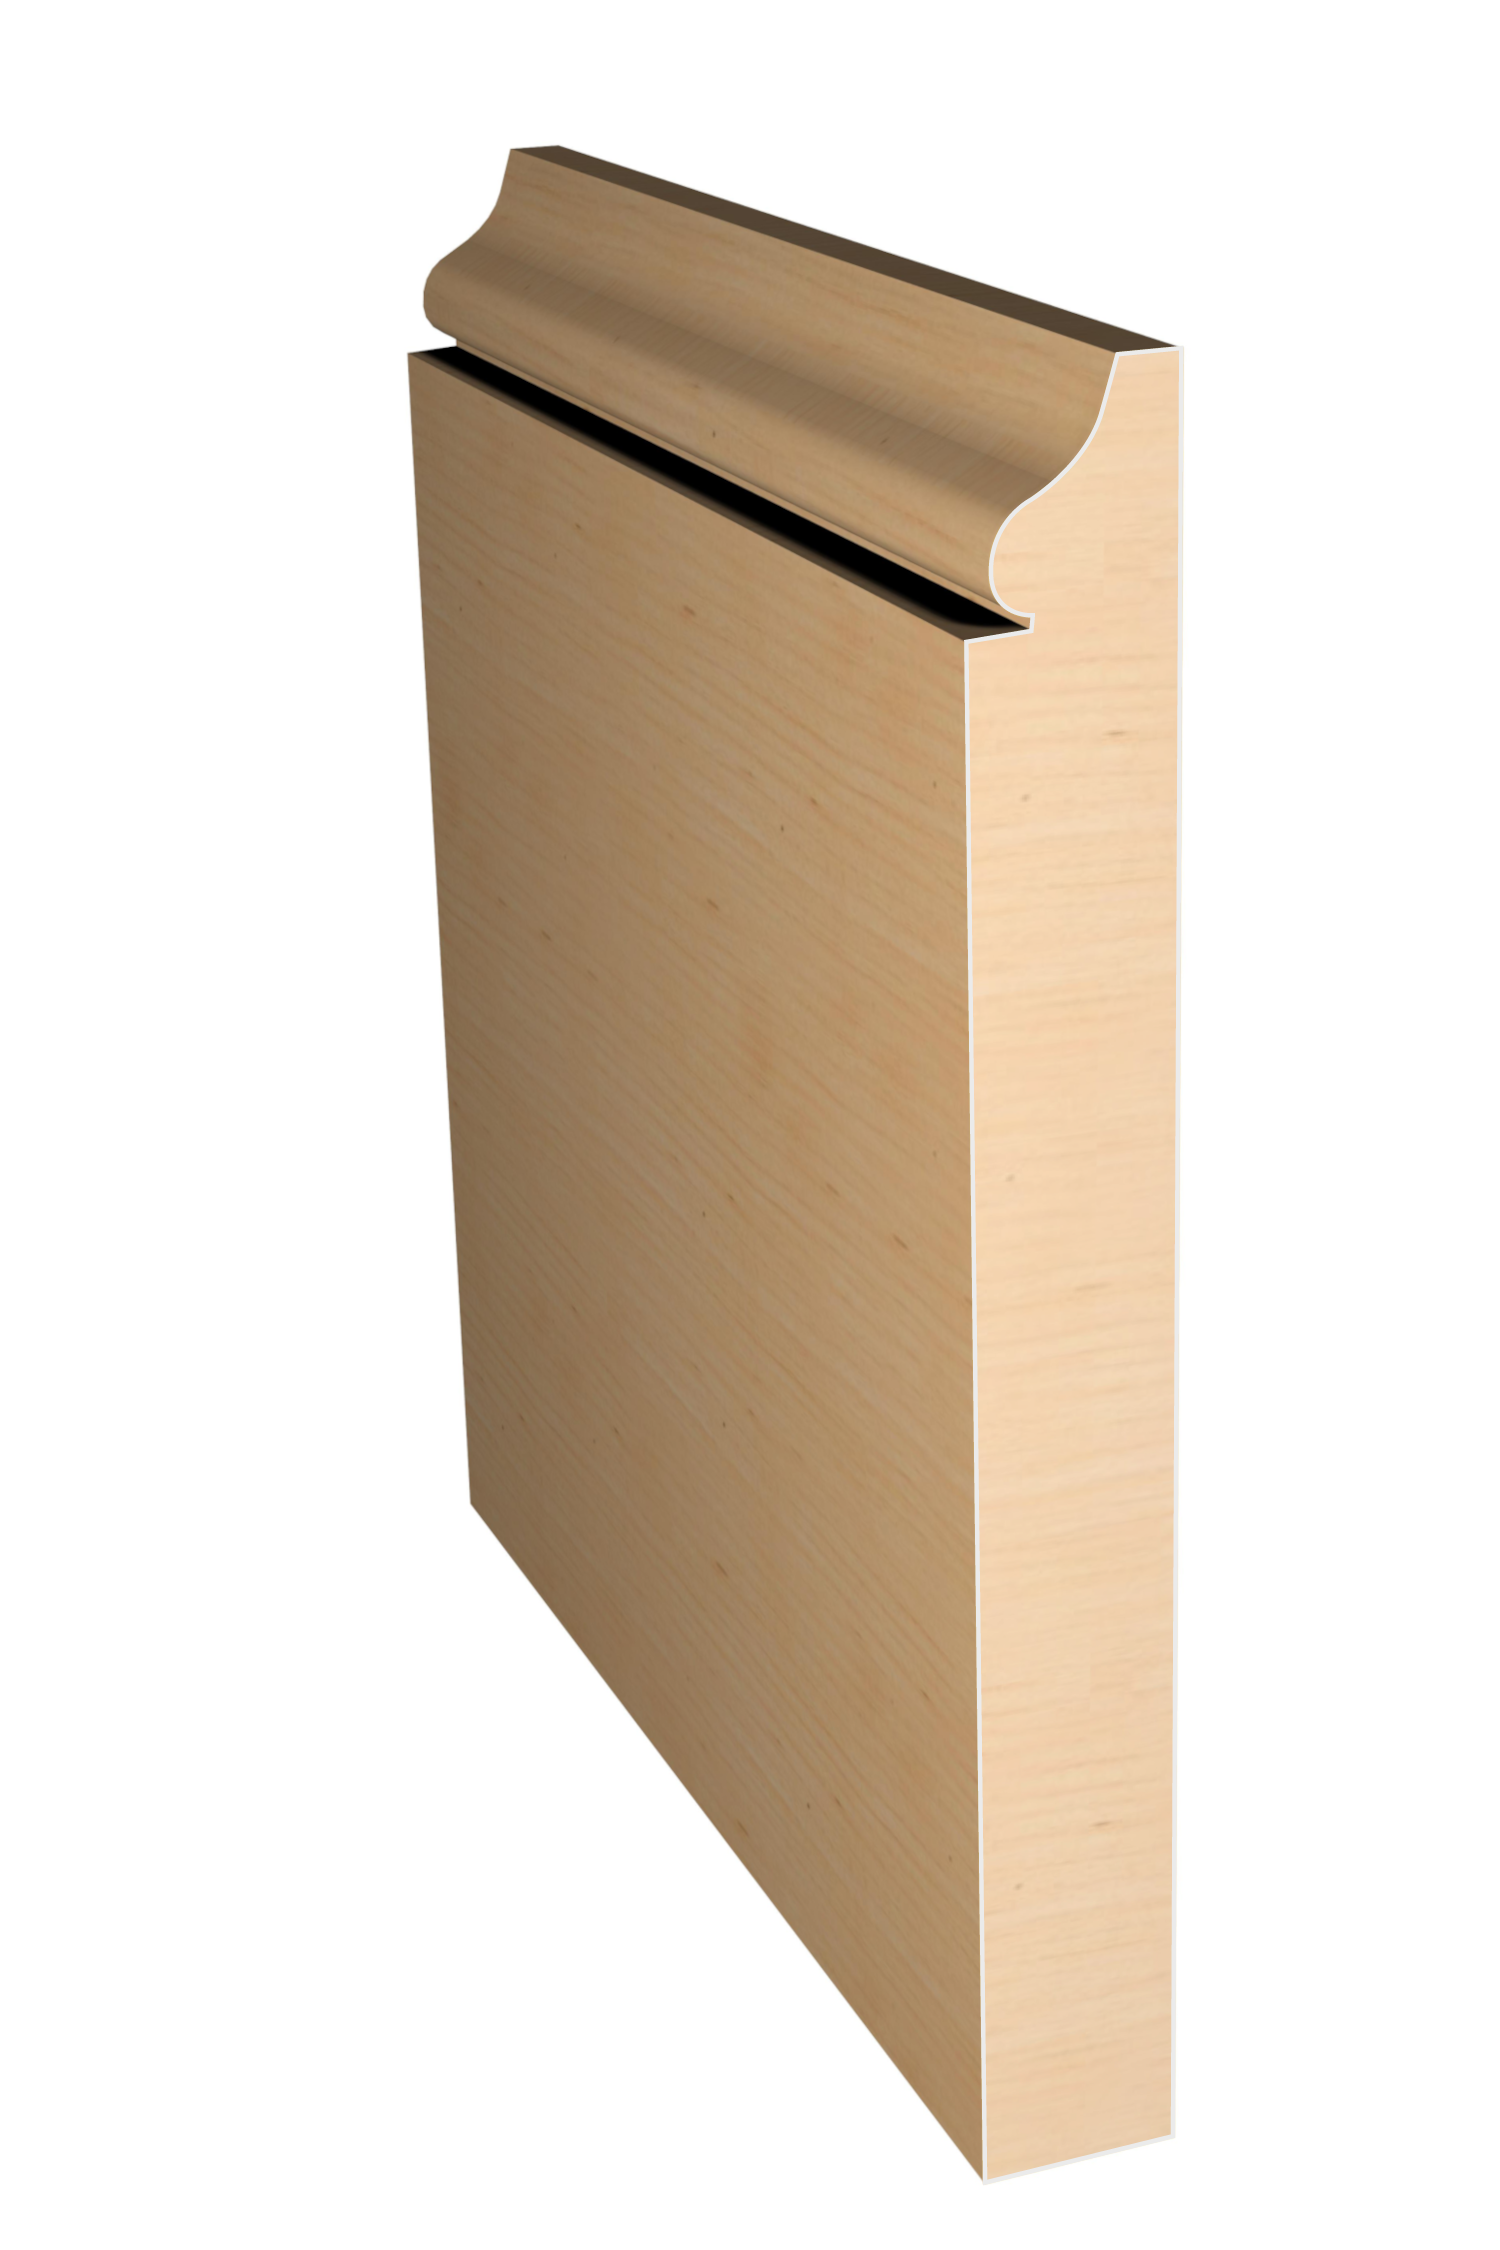 Three dimensional rendering of custom base wood molding BAPL6126 made by Public Lumber Company in Detroit.